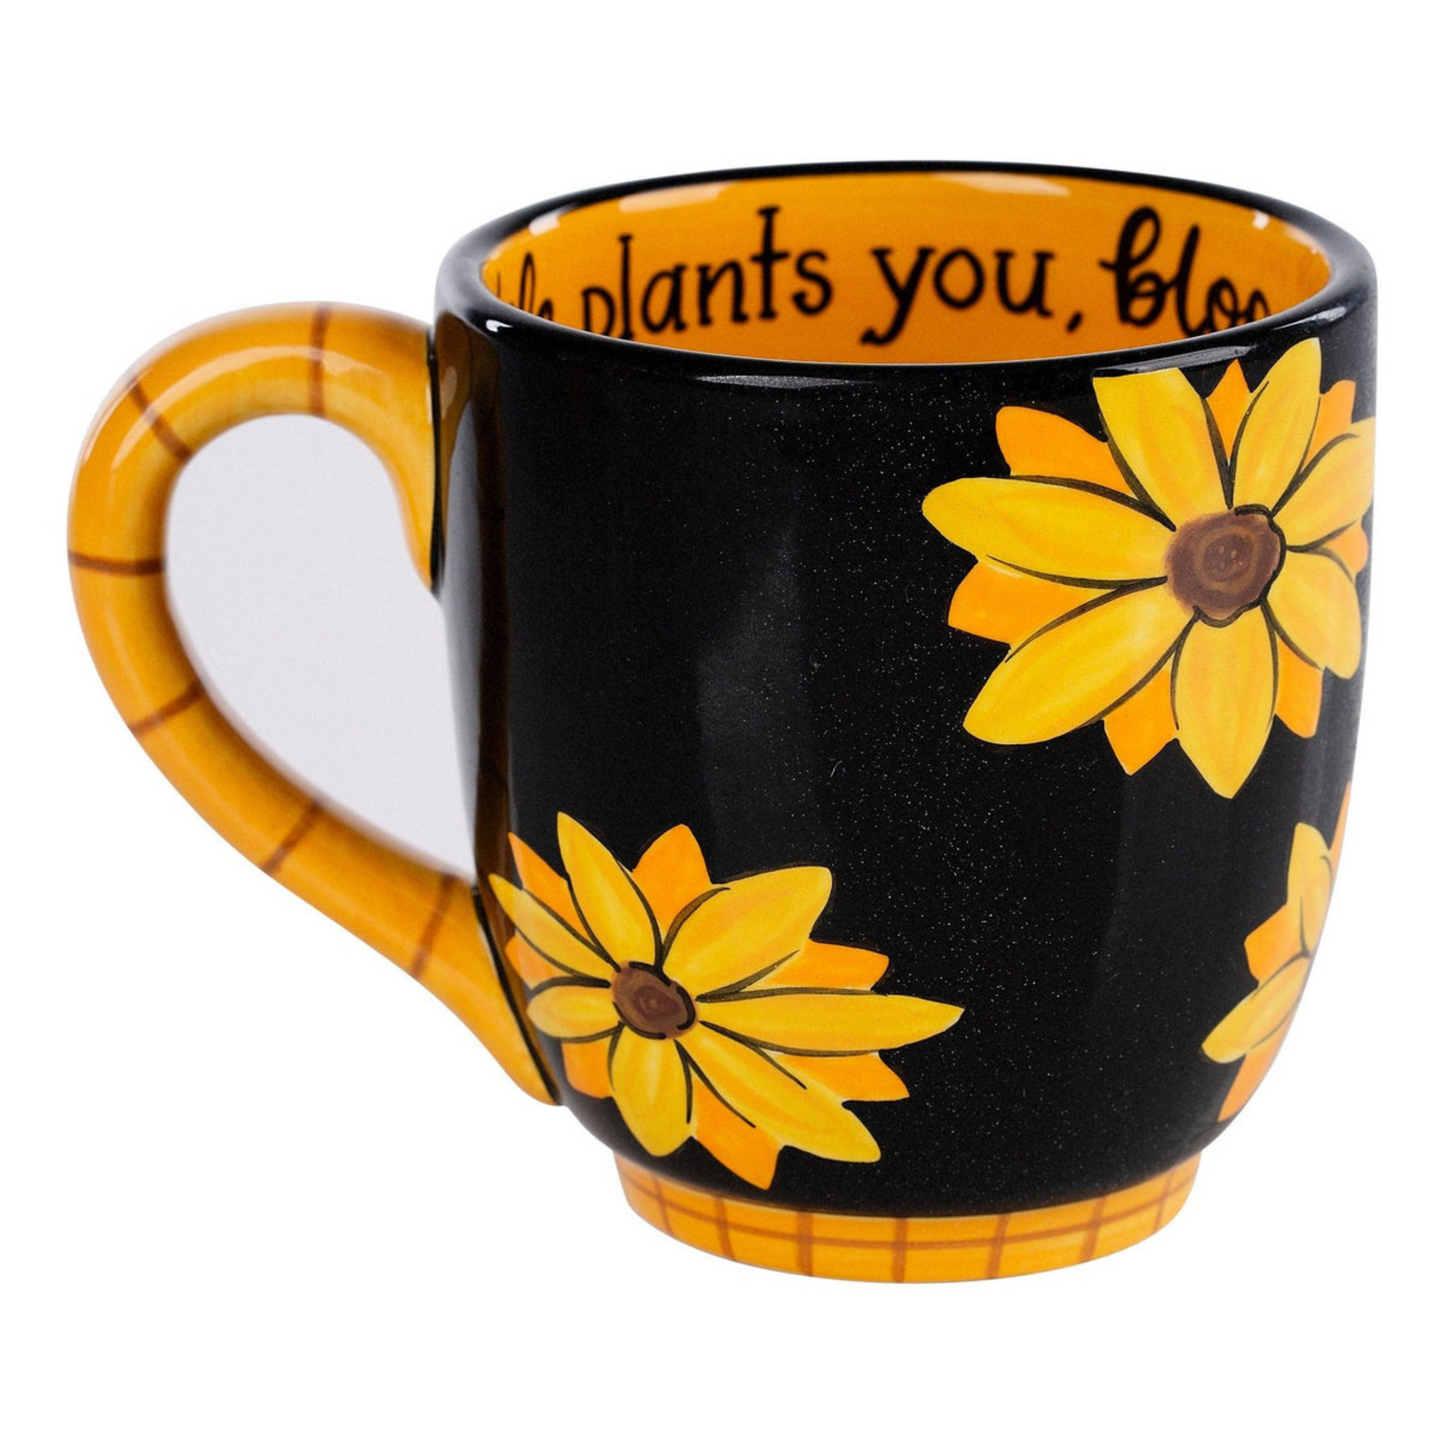 Where The Lord Plants You, Bloom With Grace Sunflower Mug